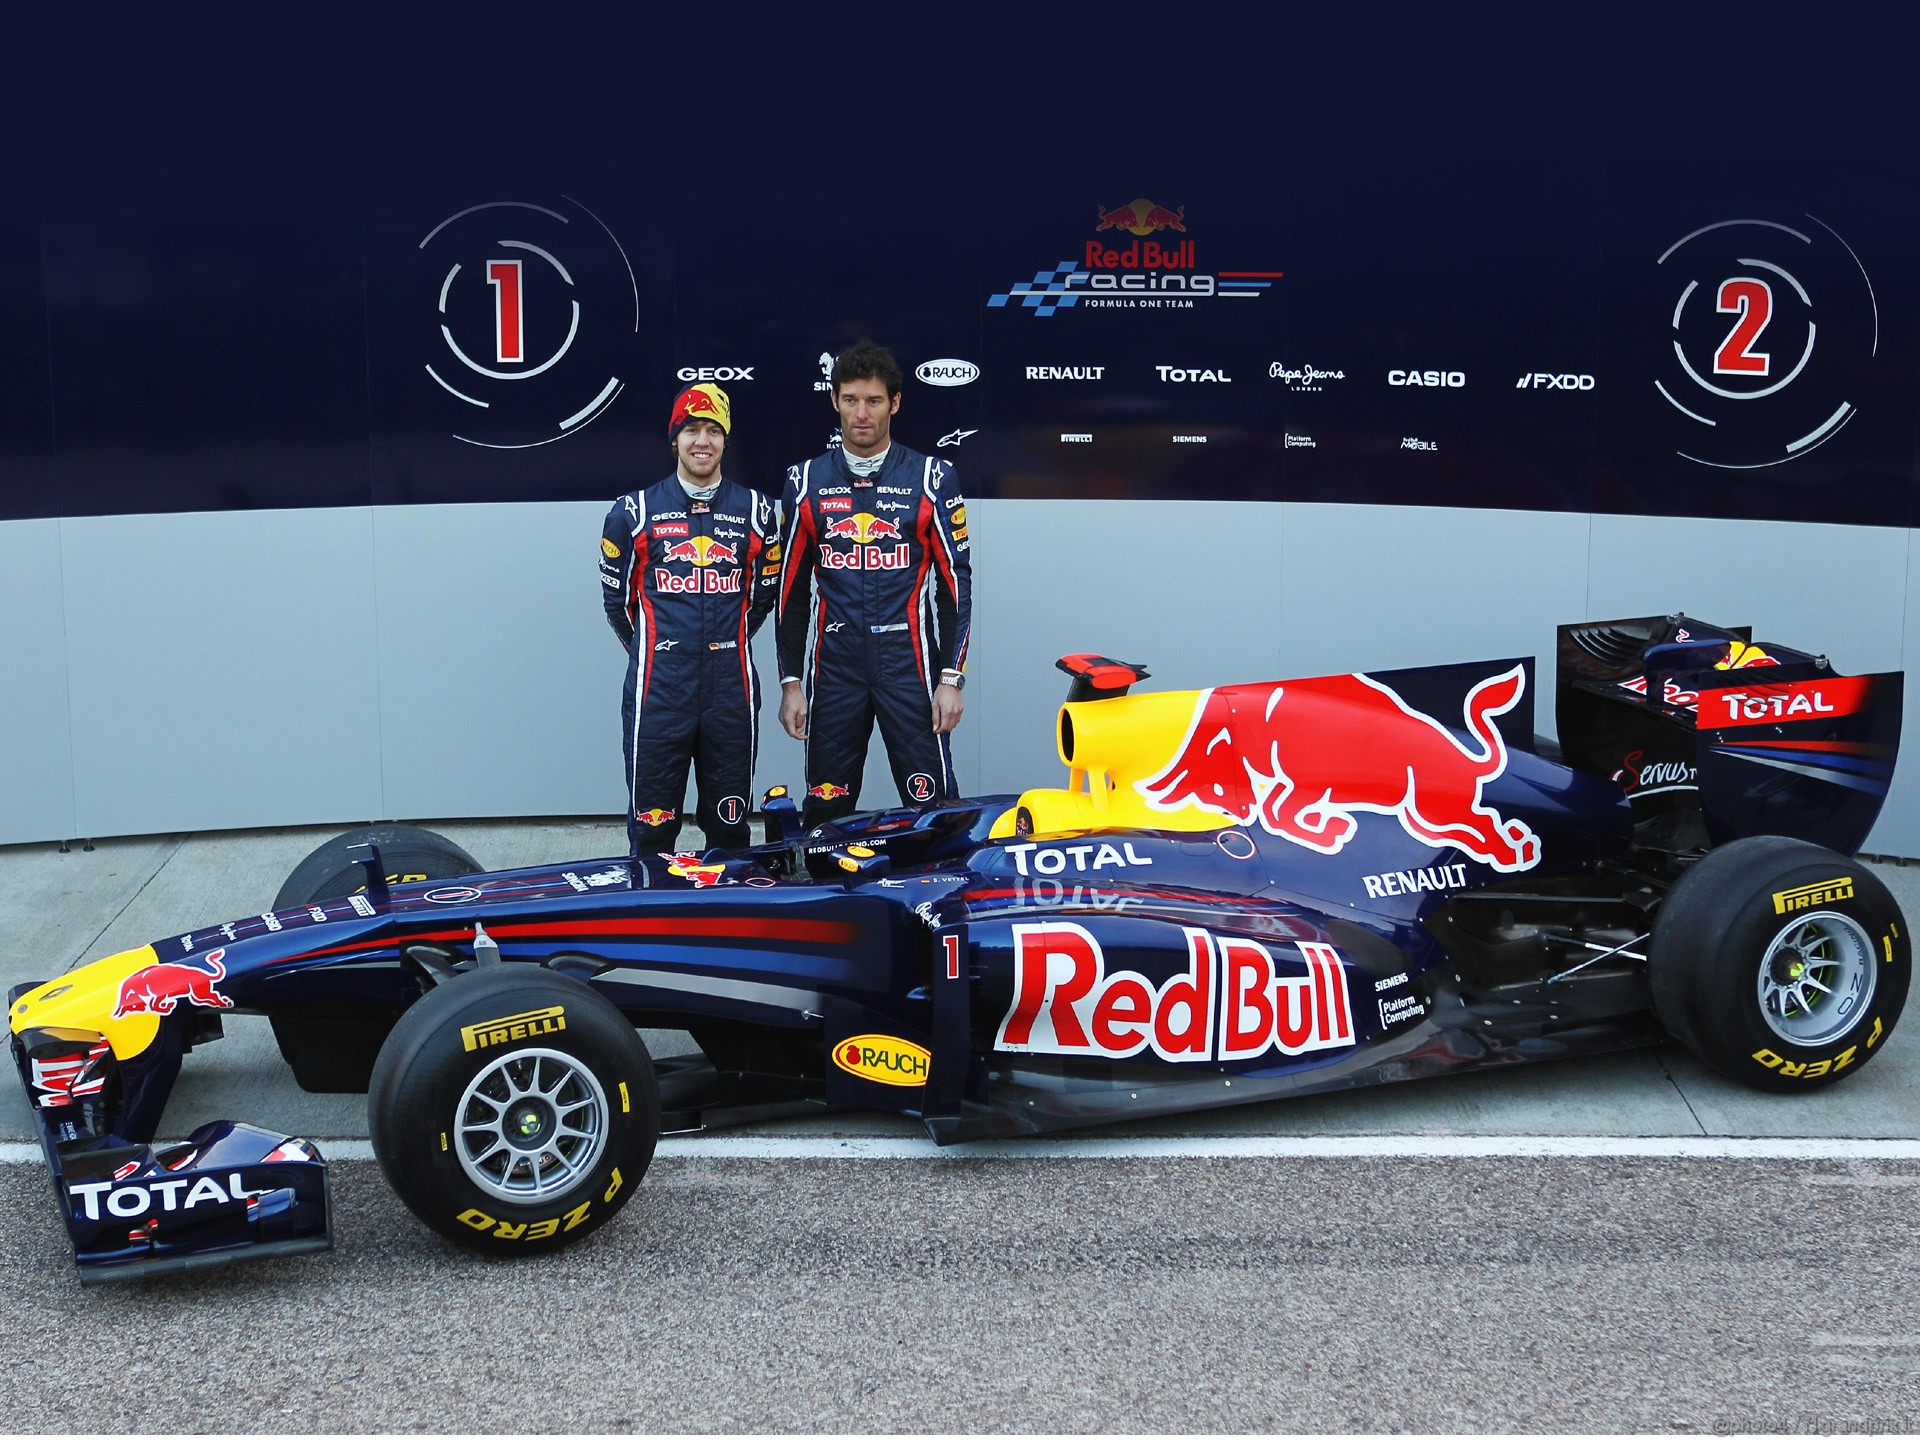 2011 red bull rb7 download free